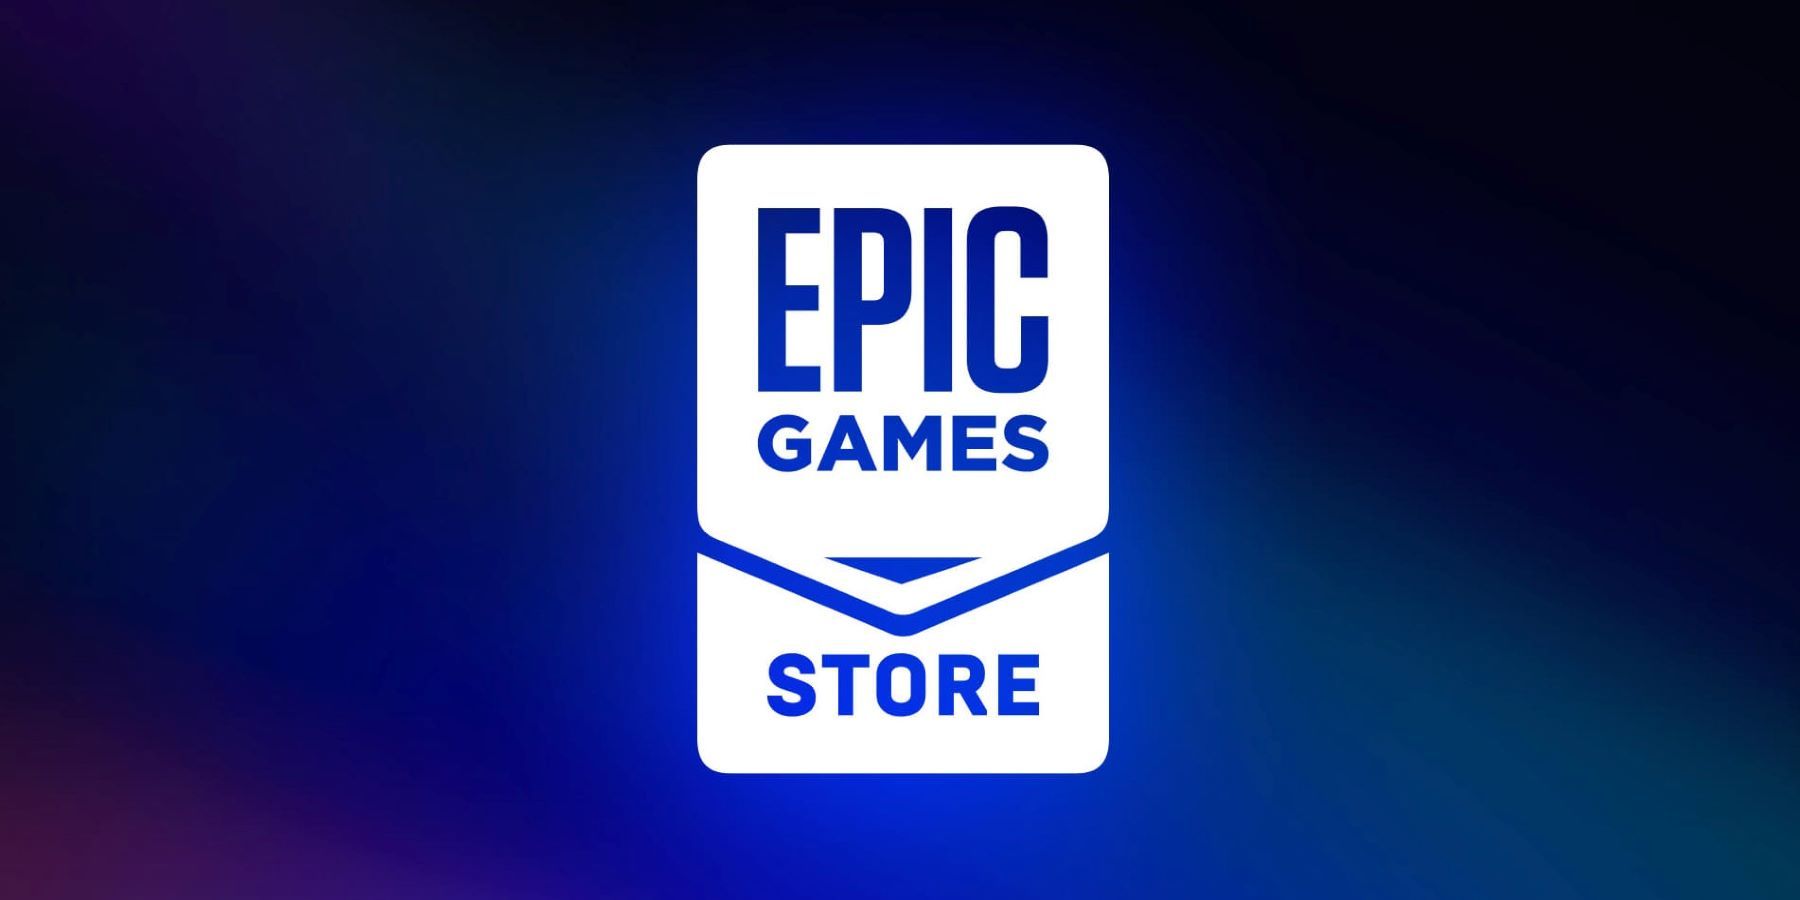 Epic Games Store logo on black and blue background